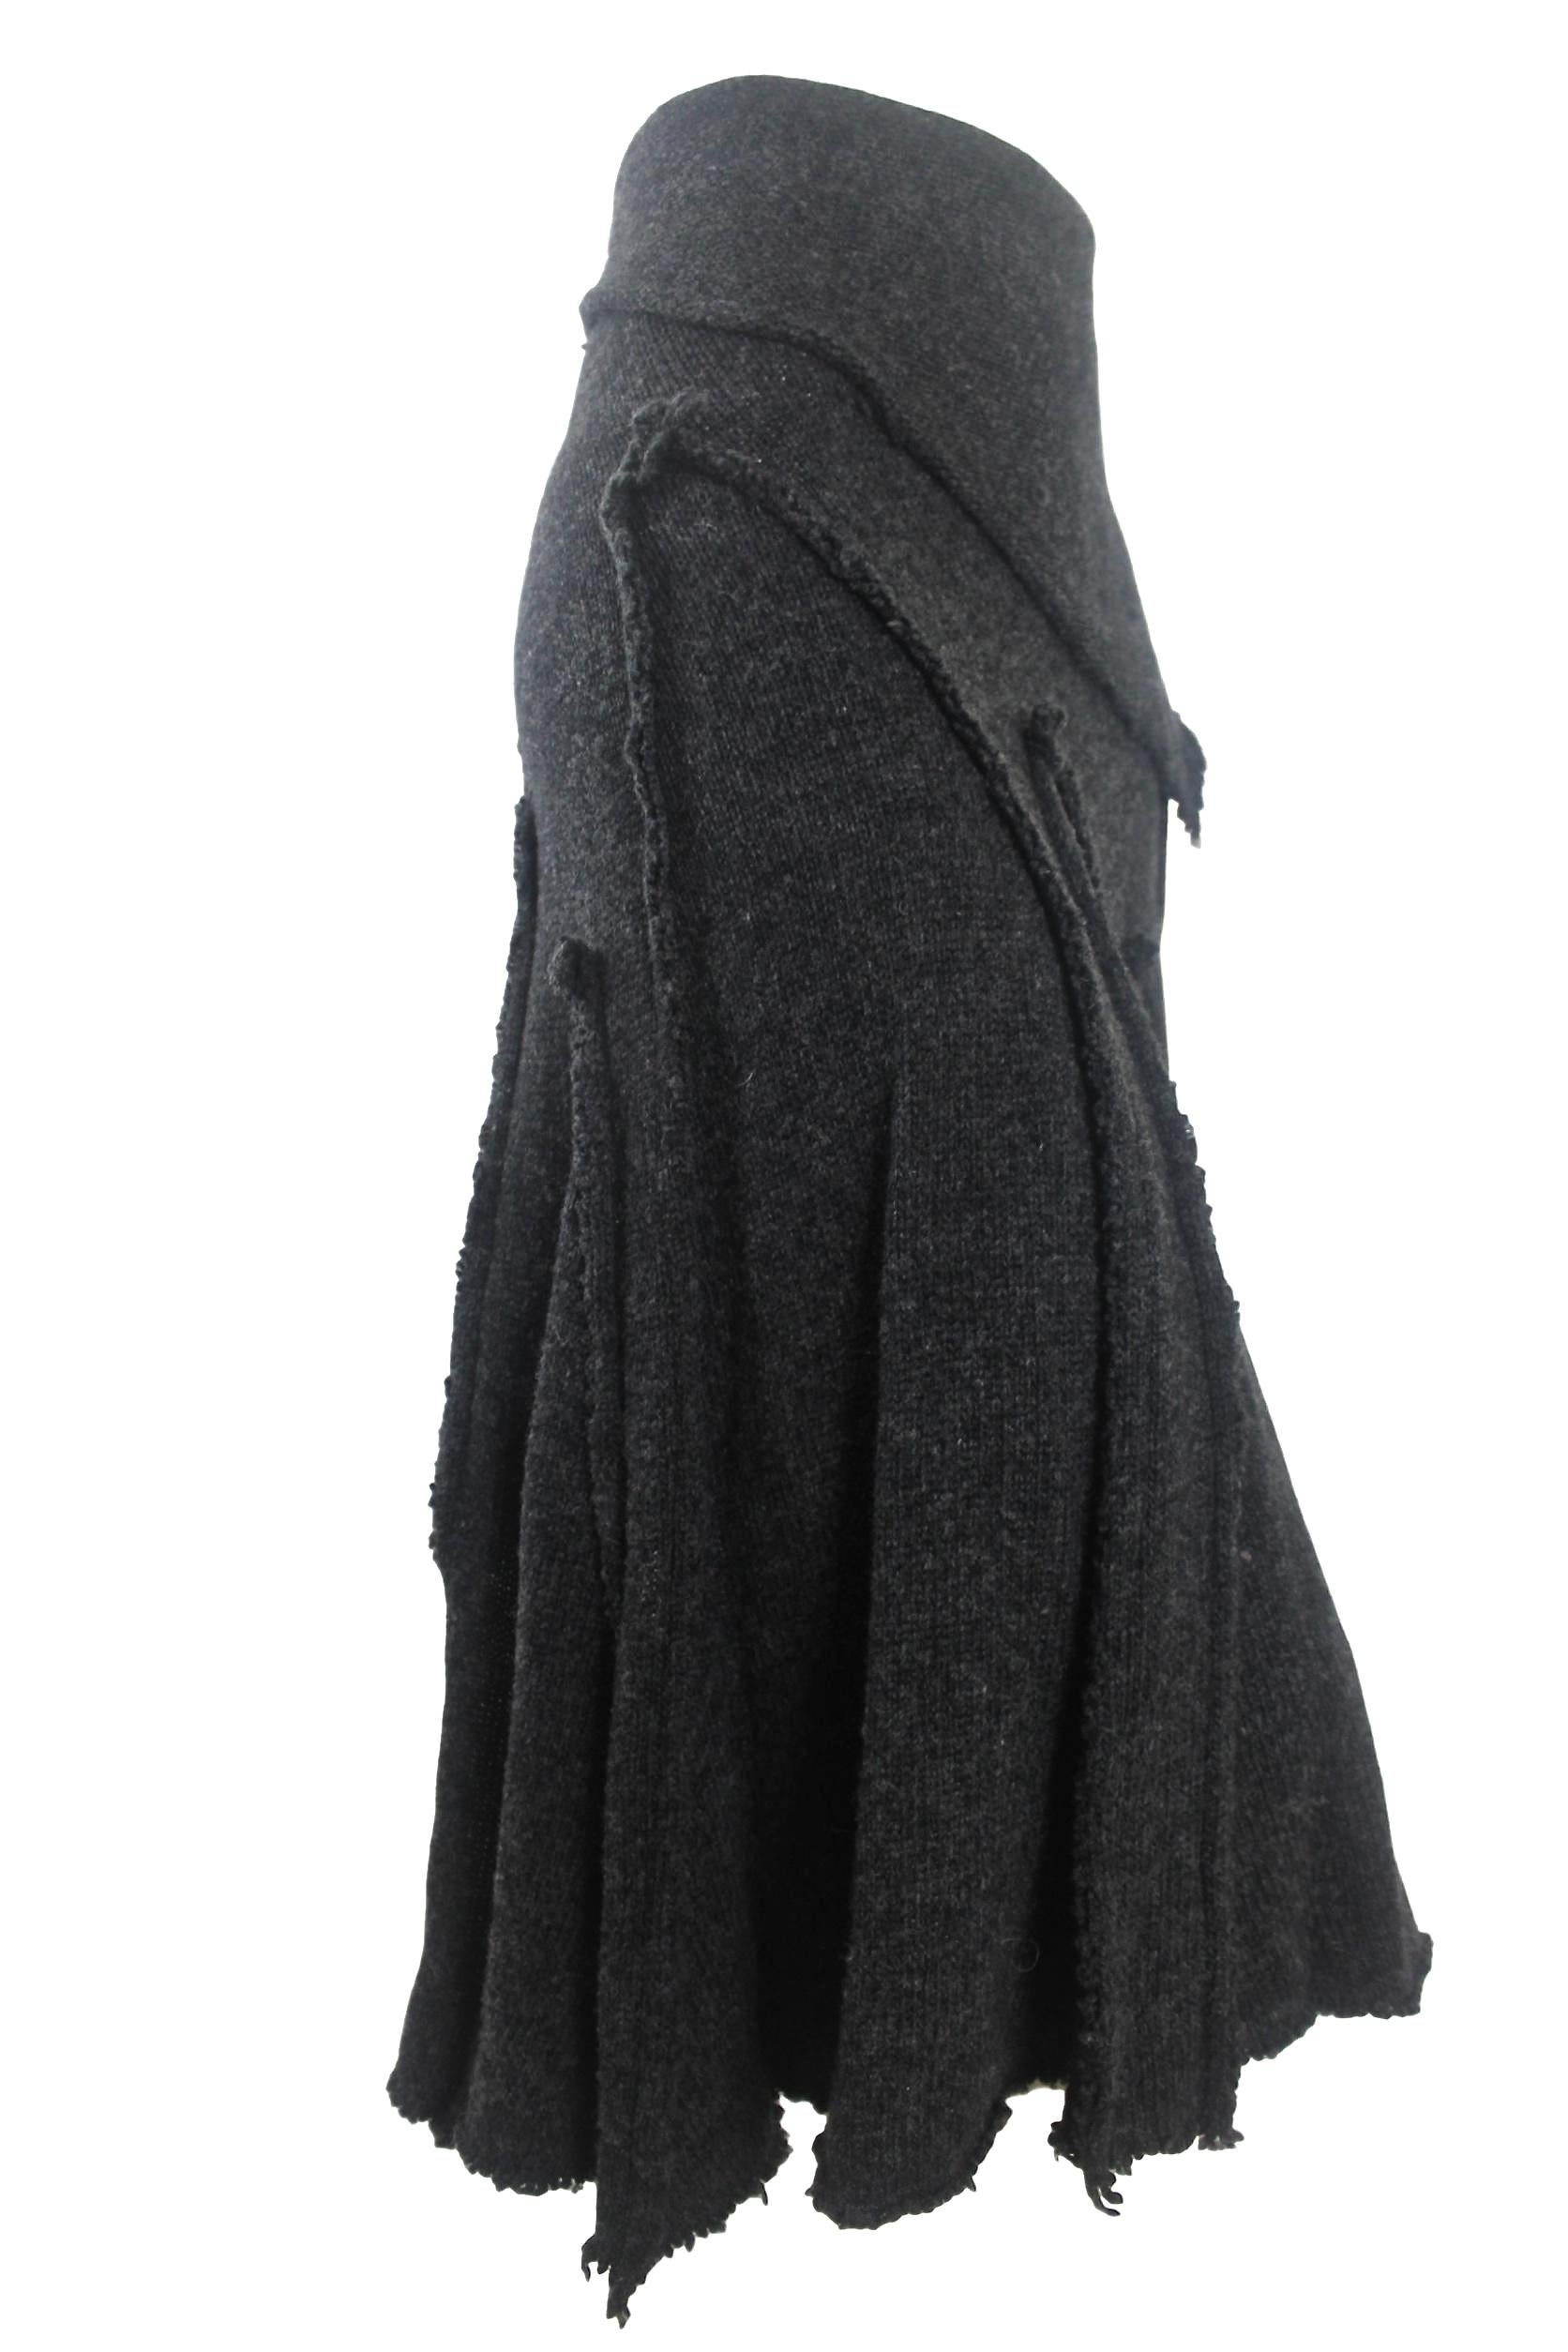 Come des Garcons 2002 Collection Wool Knit Skirt For Sale 2